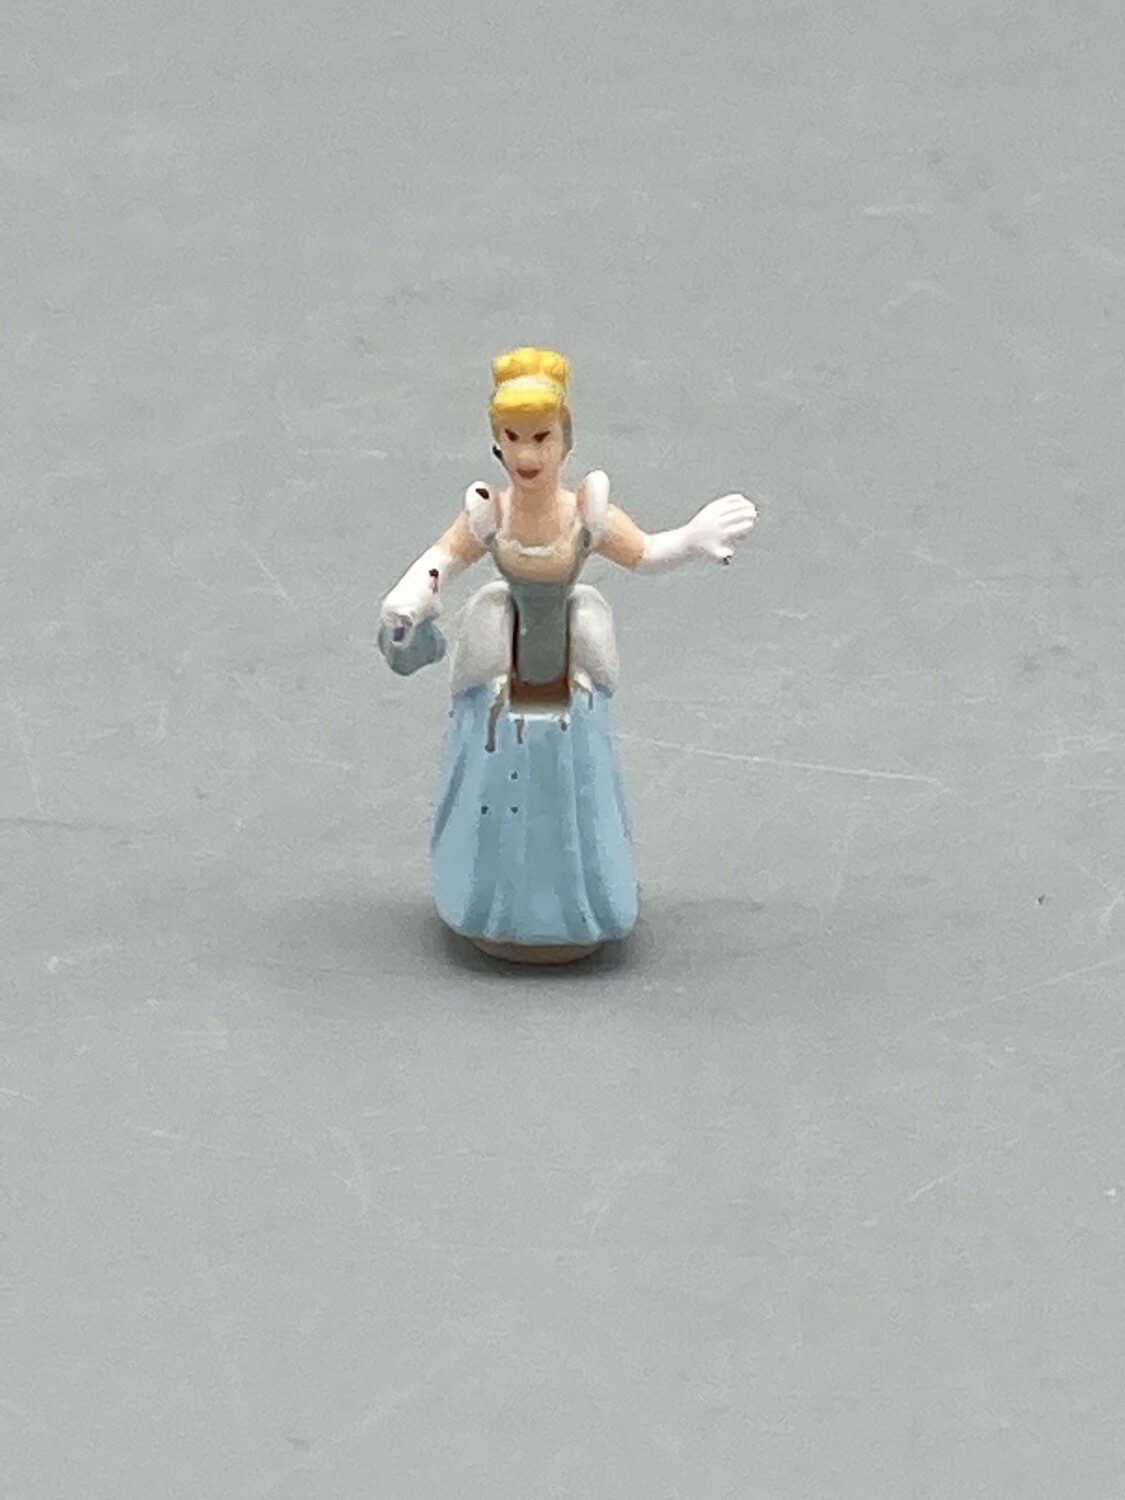 Polly Pocket Cinderella Ball Gown Figure 1995